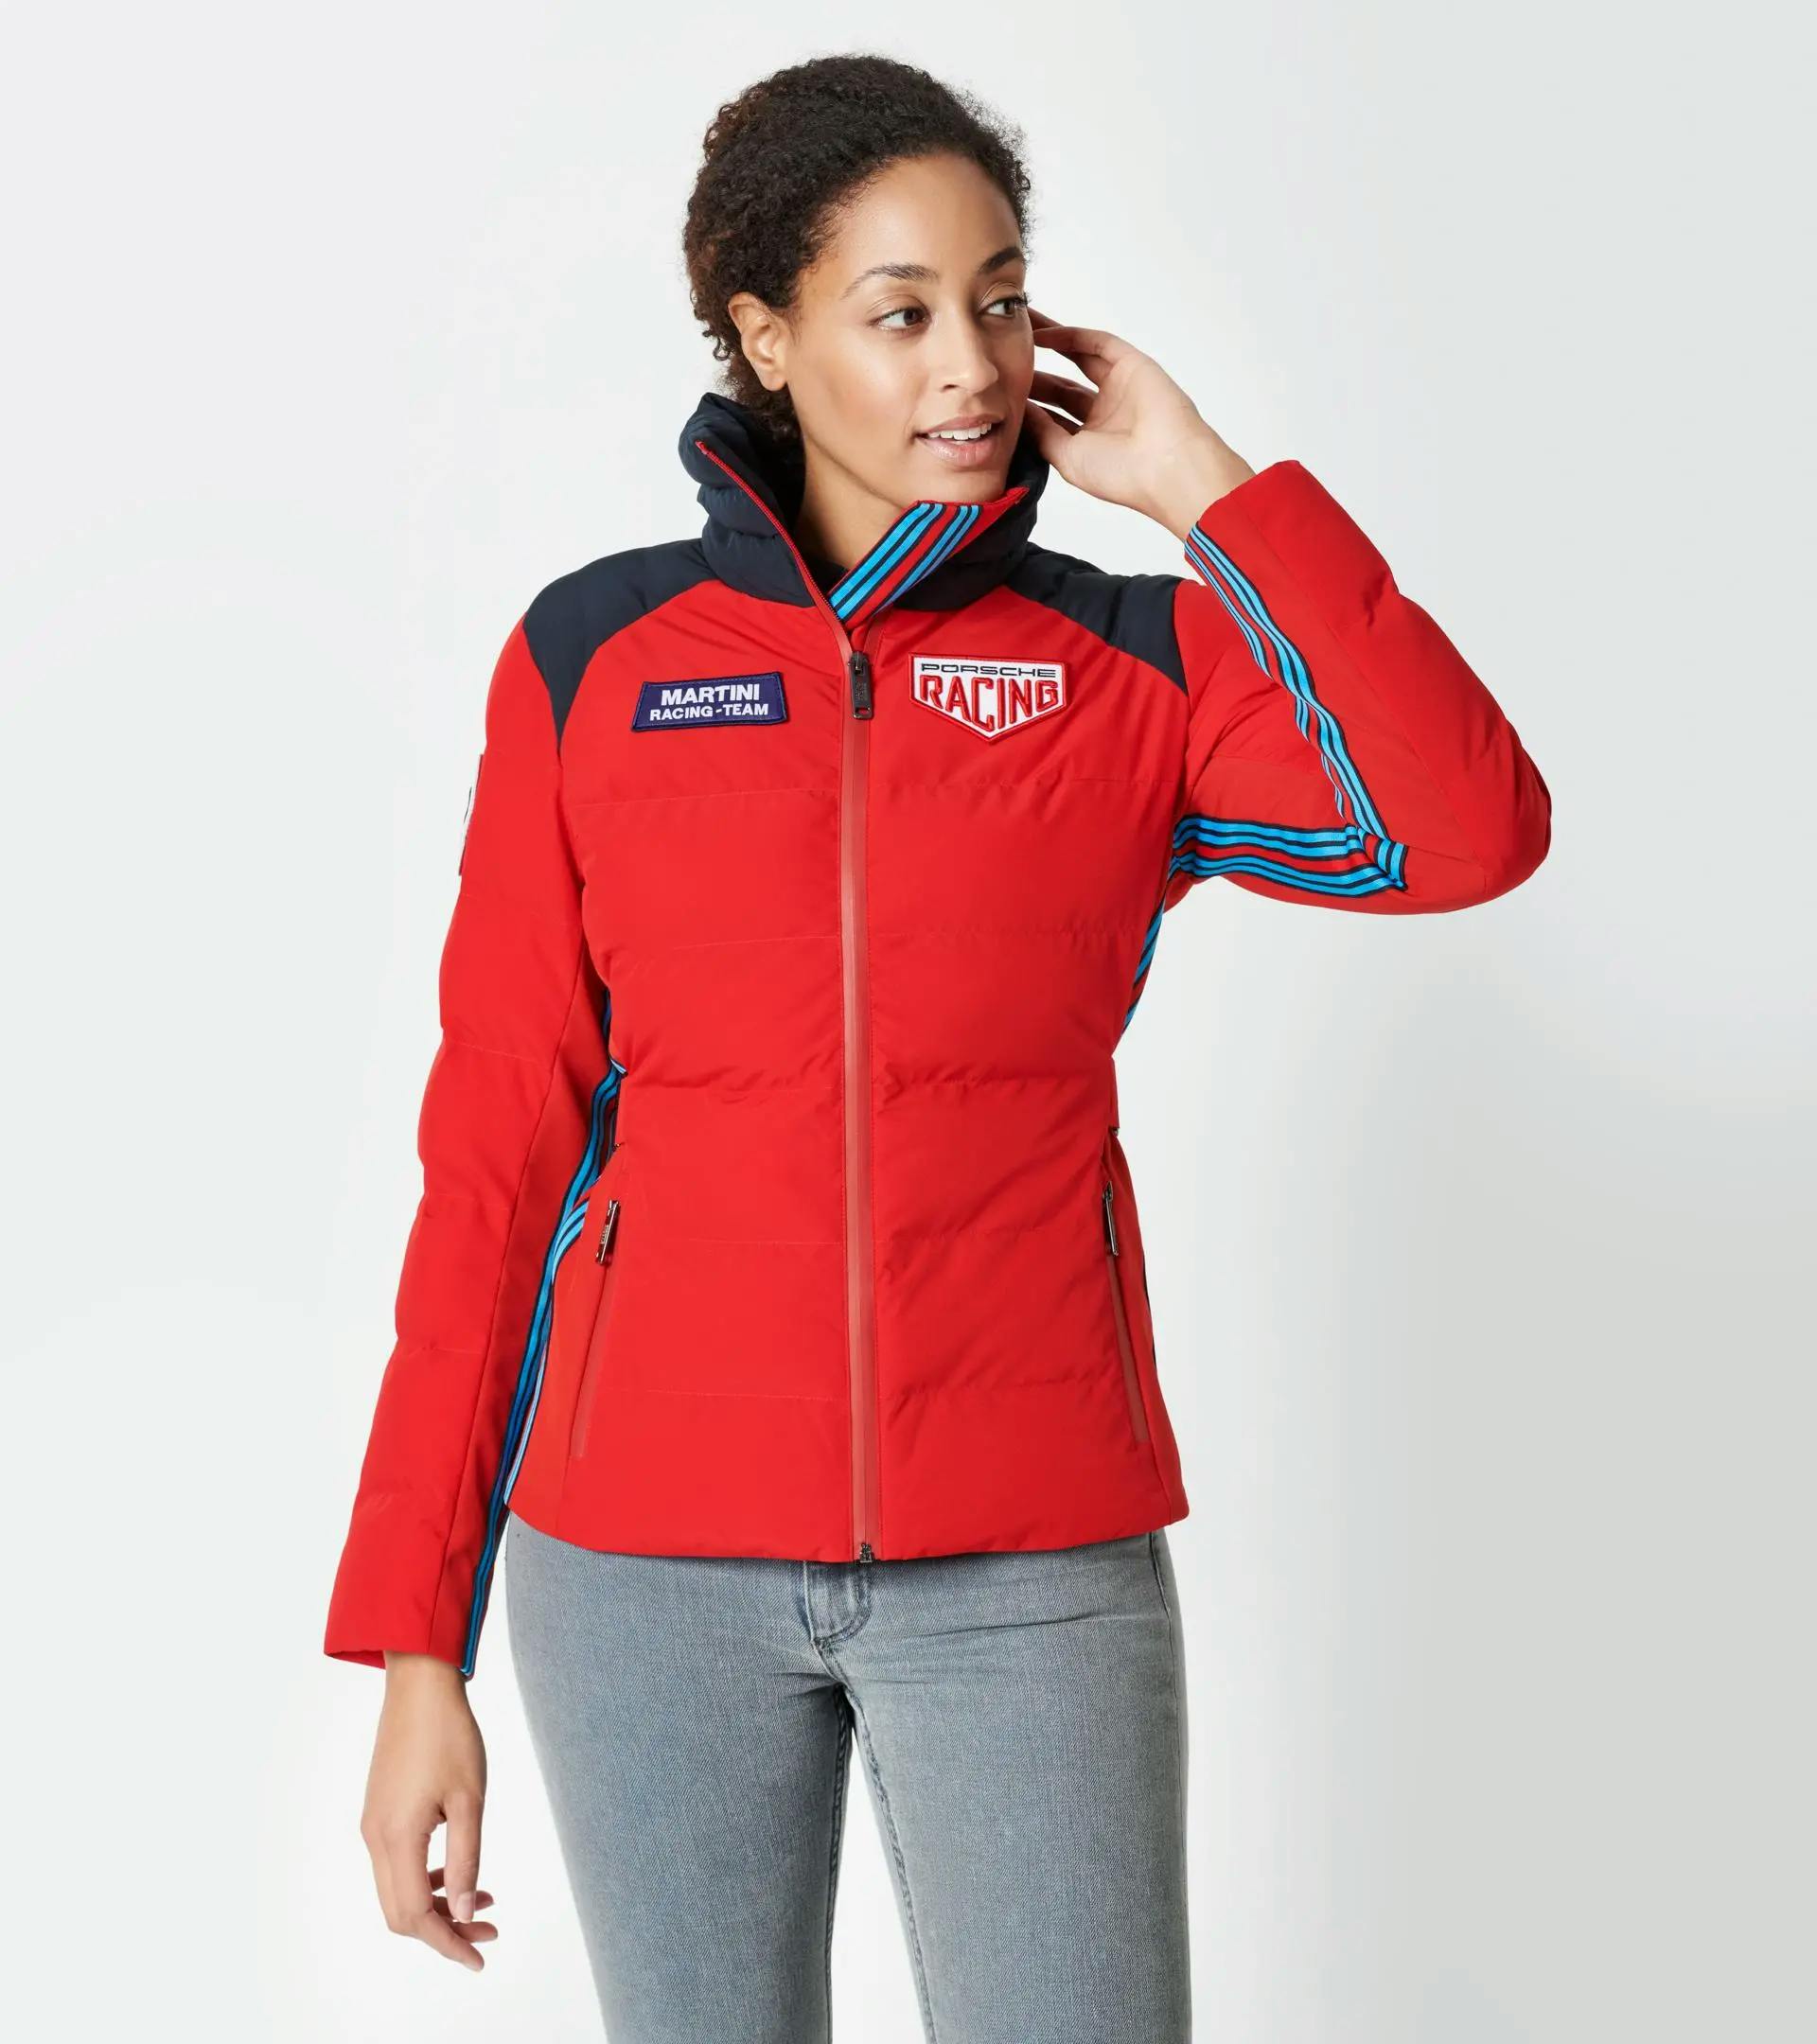 Women's quilted jacket – MARTINI RACING® thumbnail 5